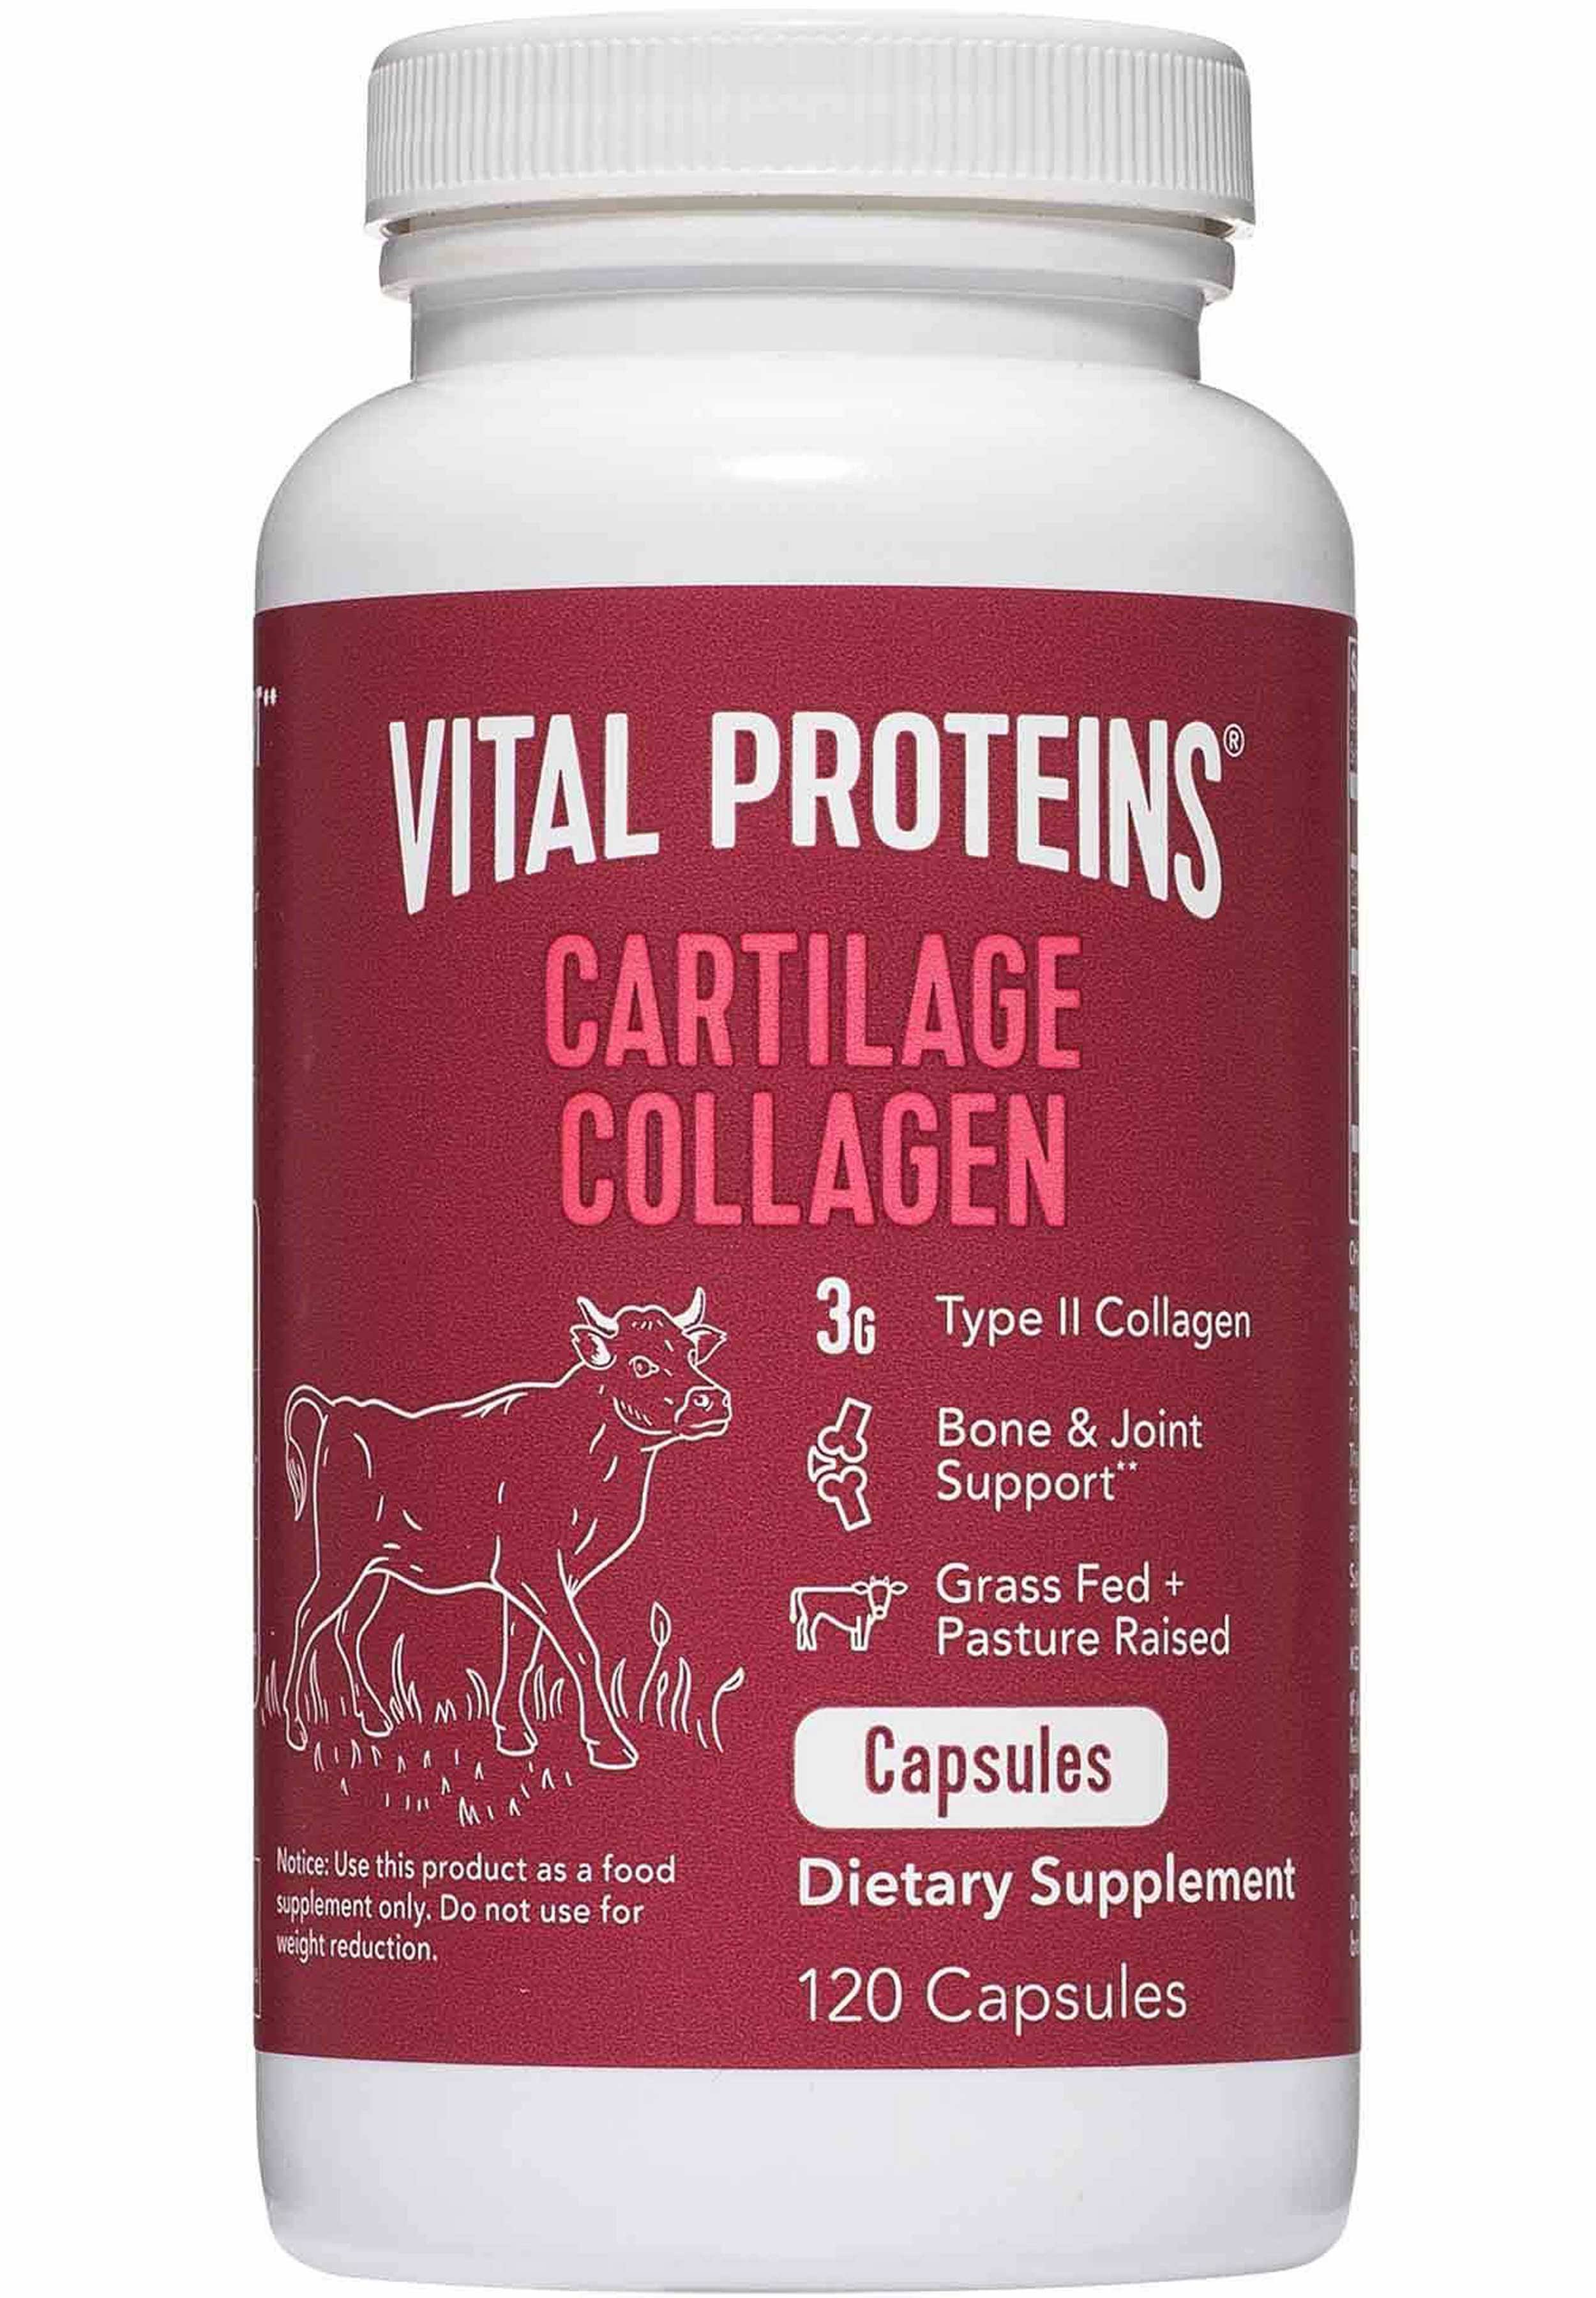 Vital Proteins Cartilage Collagen Capsules - 120